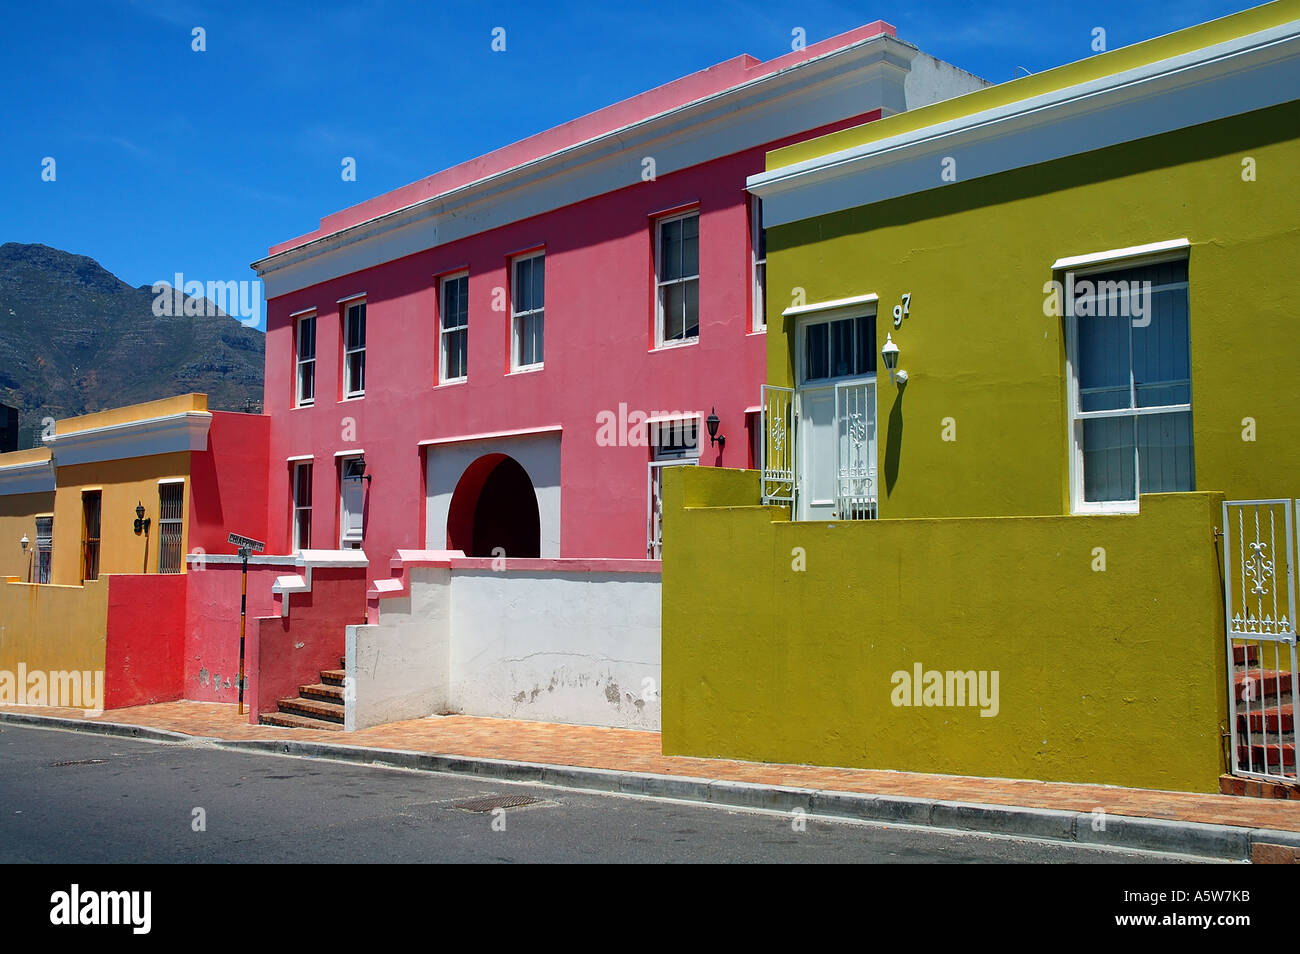 Brightly painted houses of the Bo Kaap the Cape Malay quarter of Cape Town Stock Photo